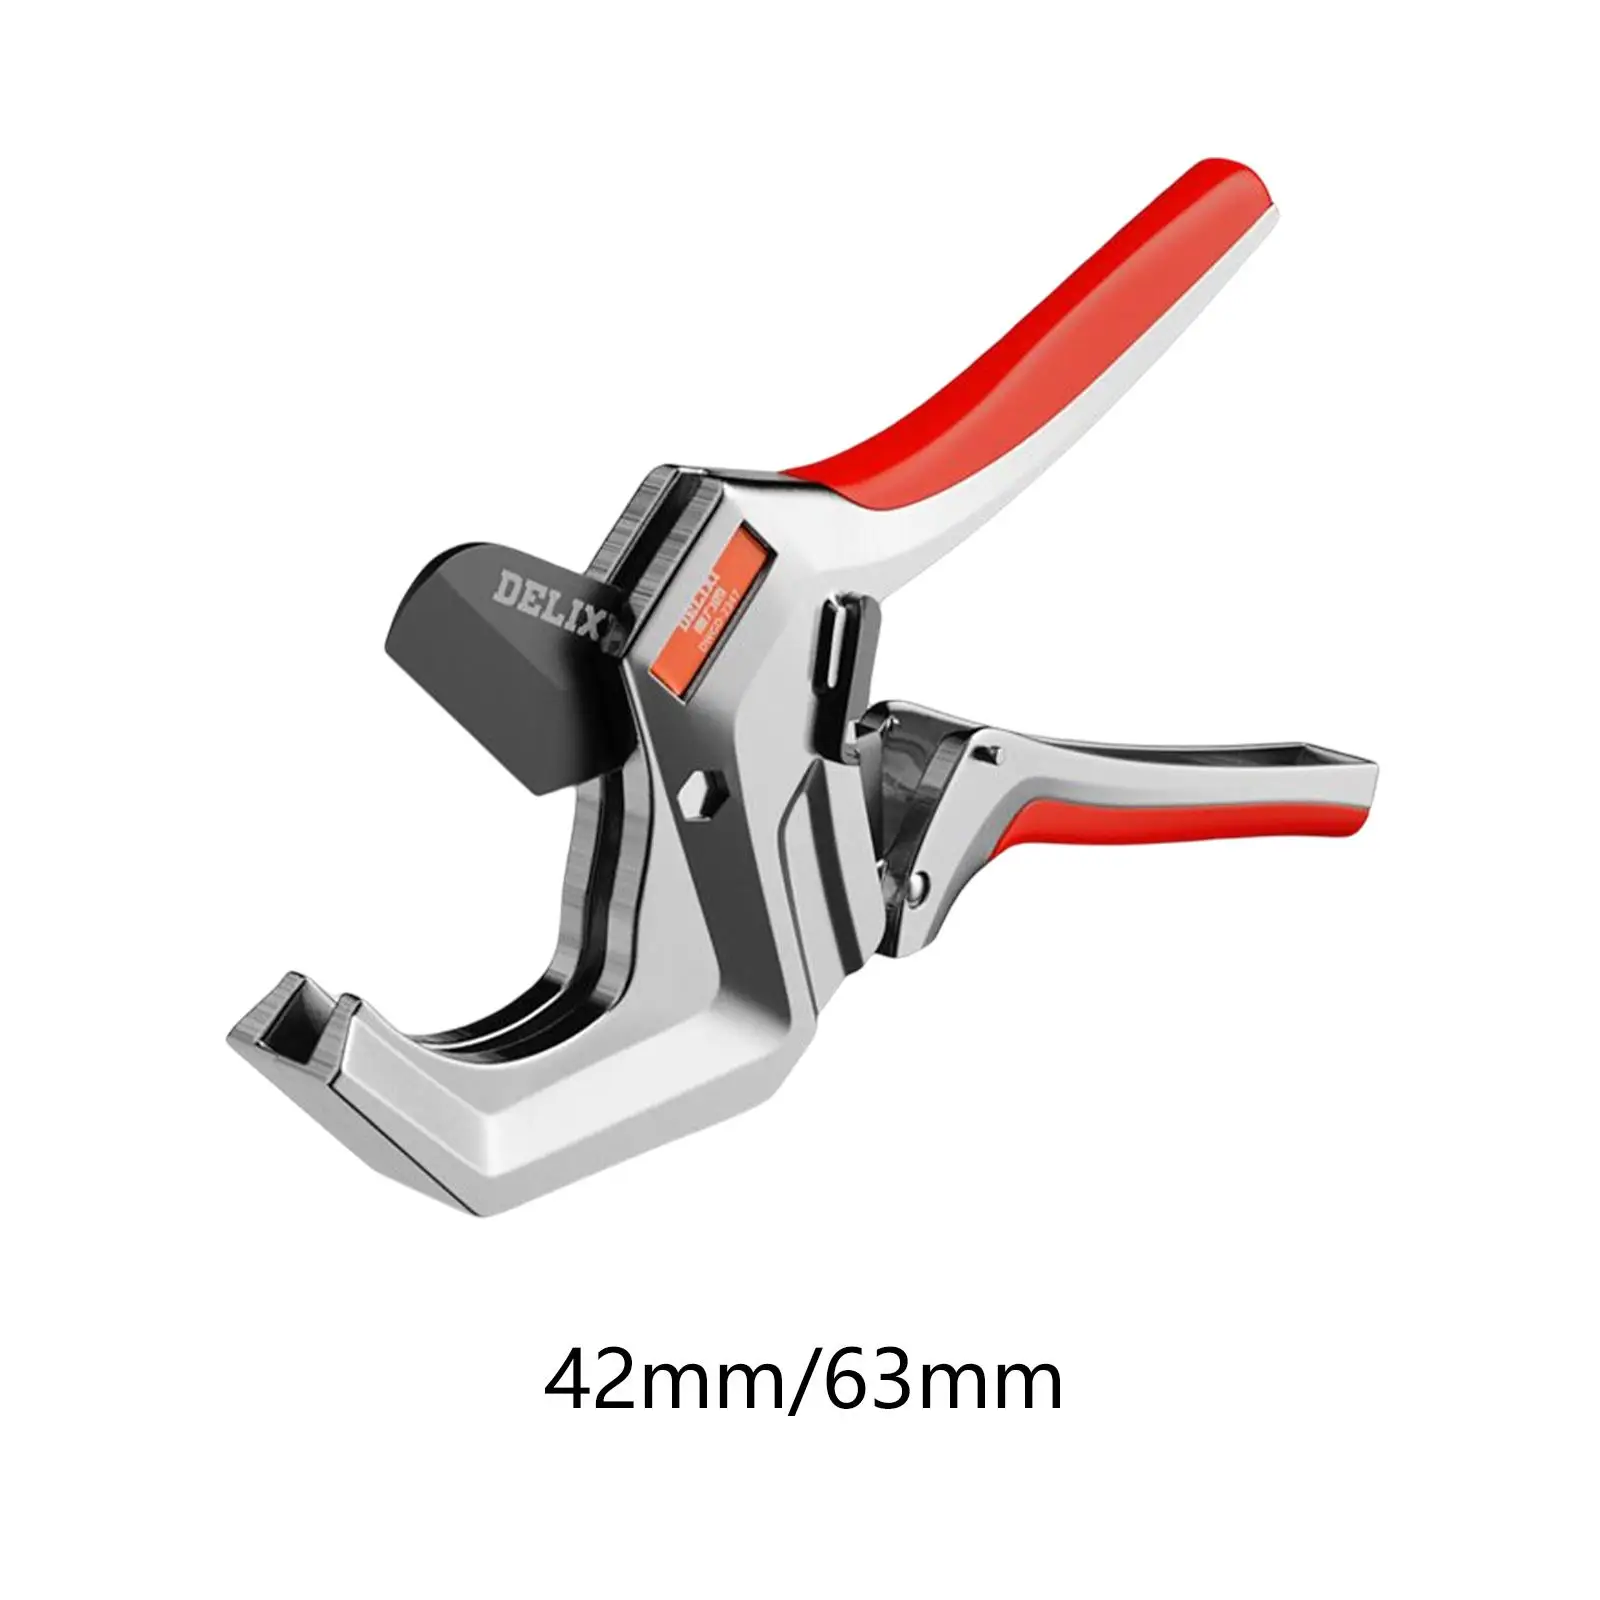 SK5 Steel PVC Pipe Cutter Aluminum Alloy Blade with Safety Lock Non Slip Handle Tubing Cutting Scissors Plumbing Pipes Plumber